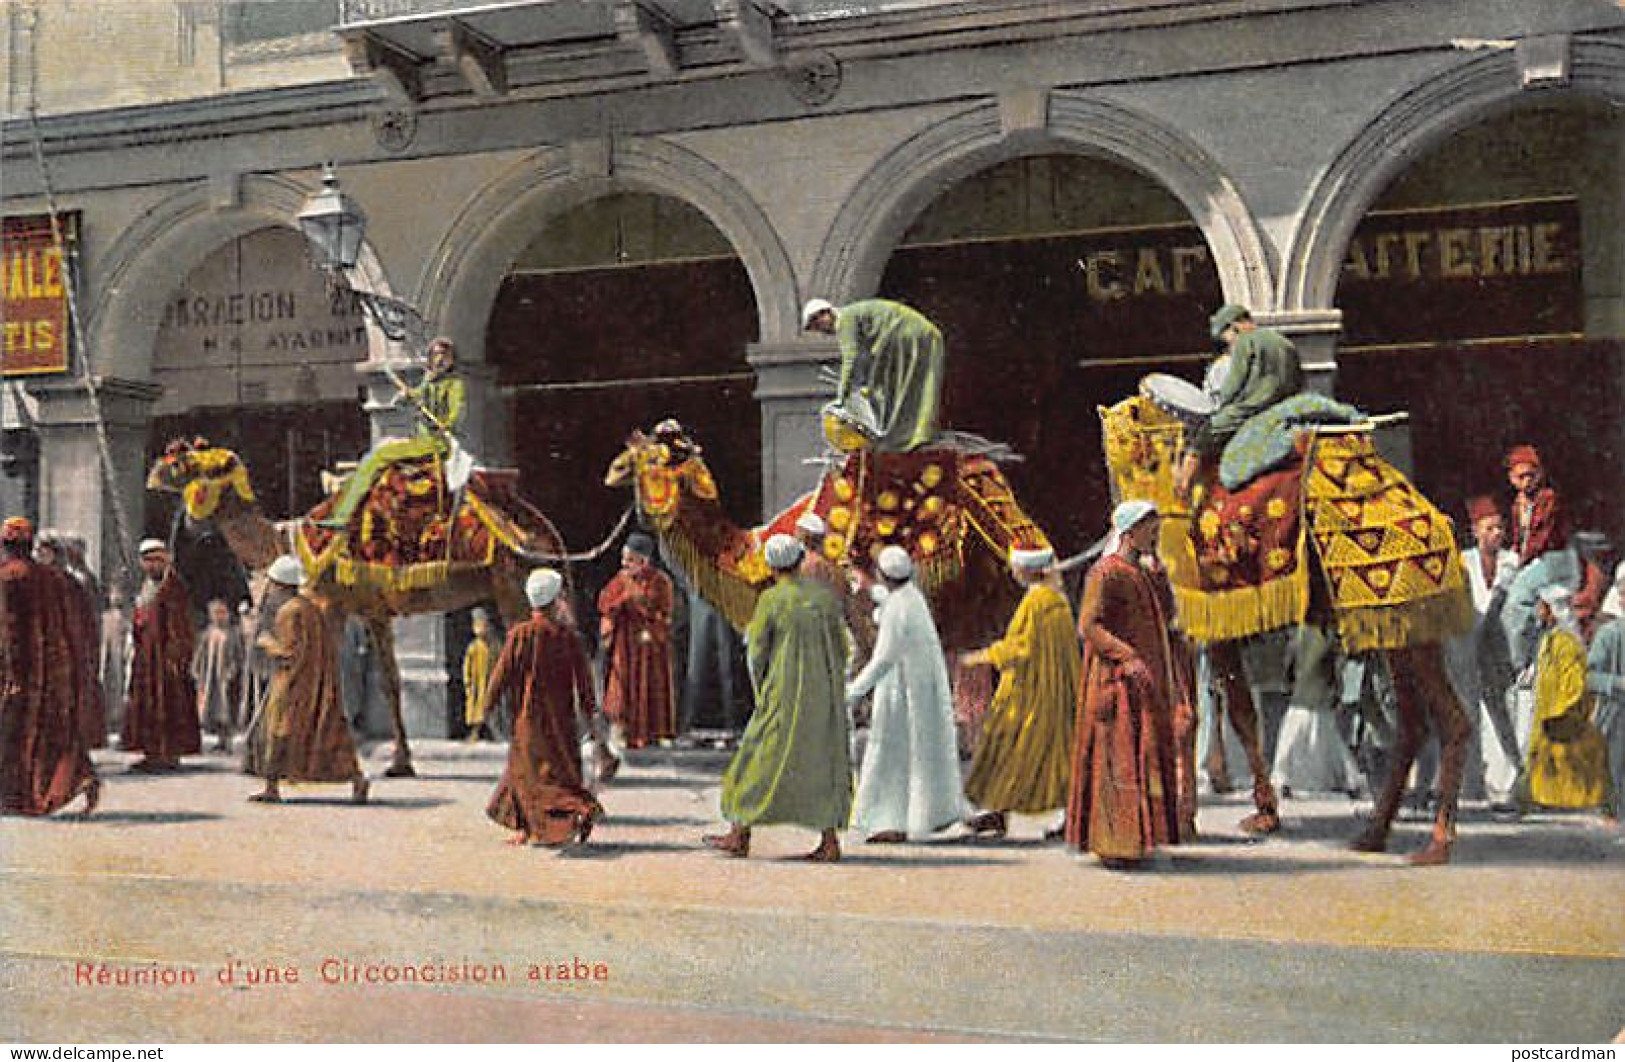 Egypt - Celebration On The Occasion Of An Arab Circumcision - Publ. The Cairo Postcard Trust 54701 - Personen